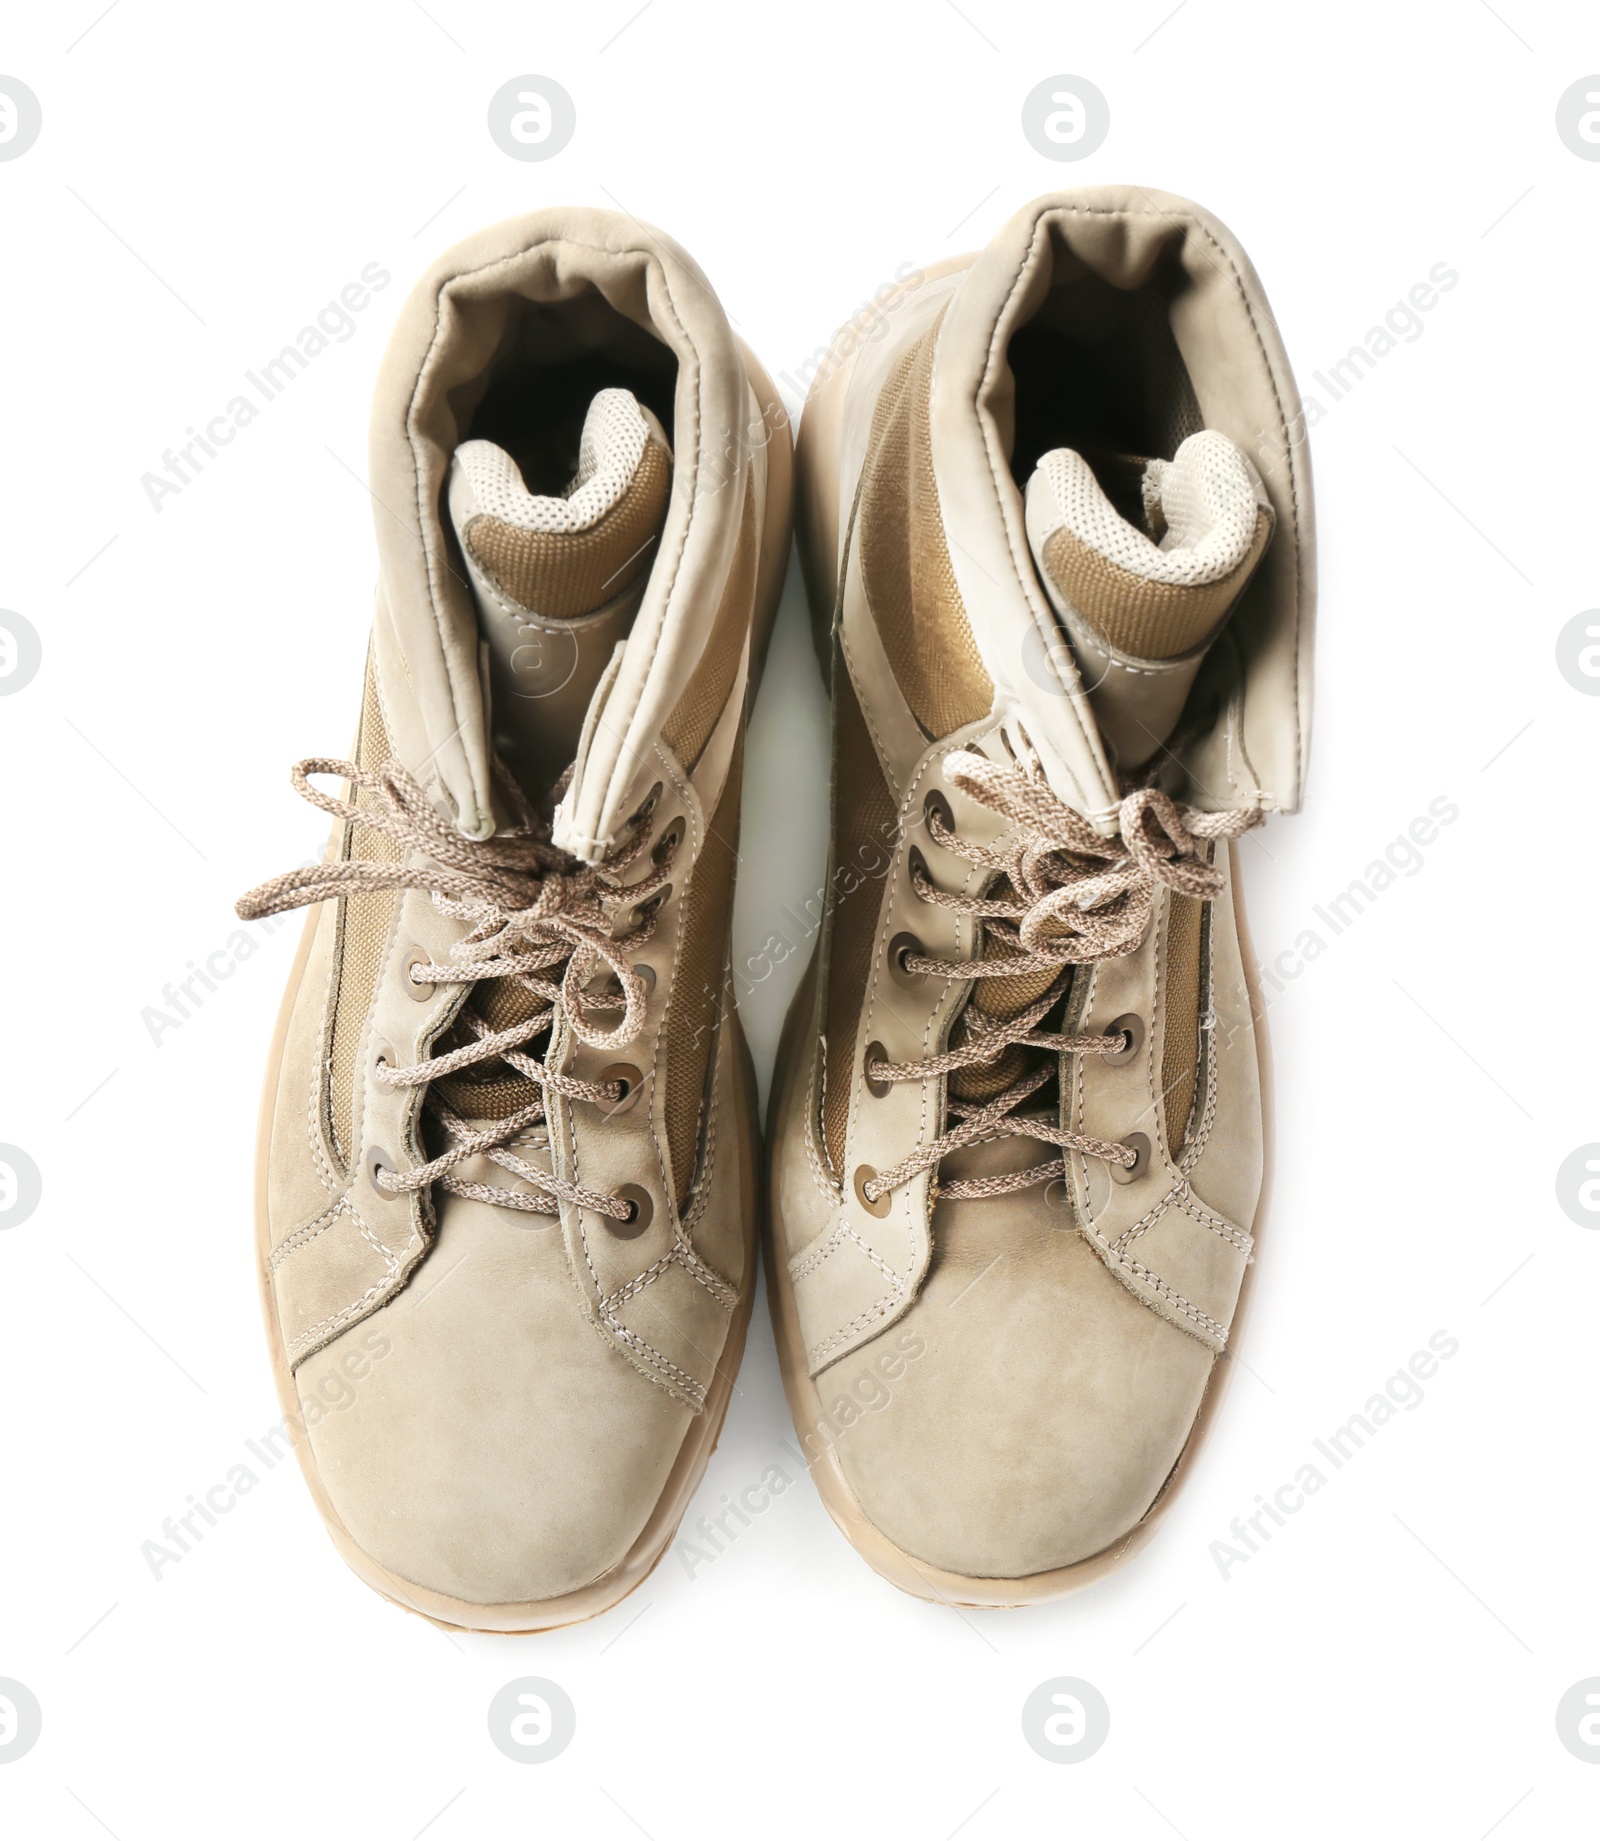 Photo of Pair of combat boots on white background